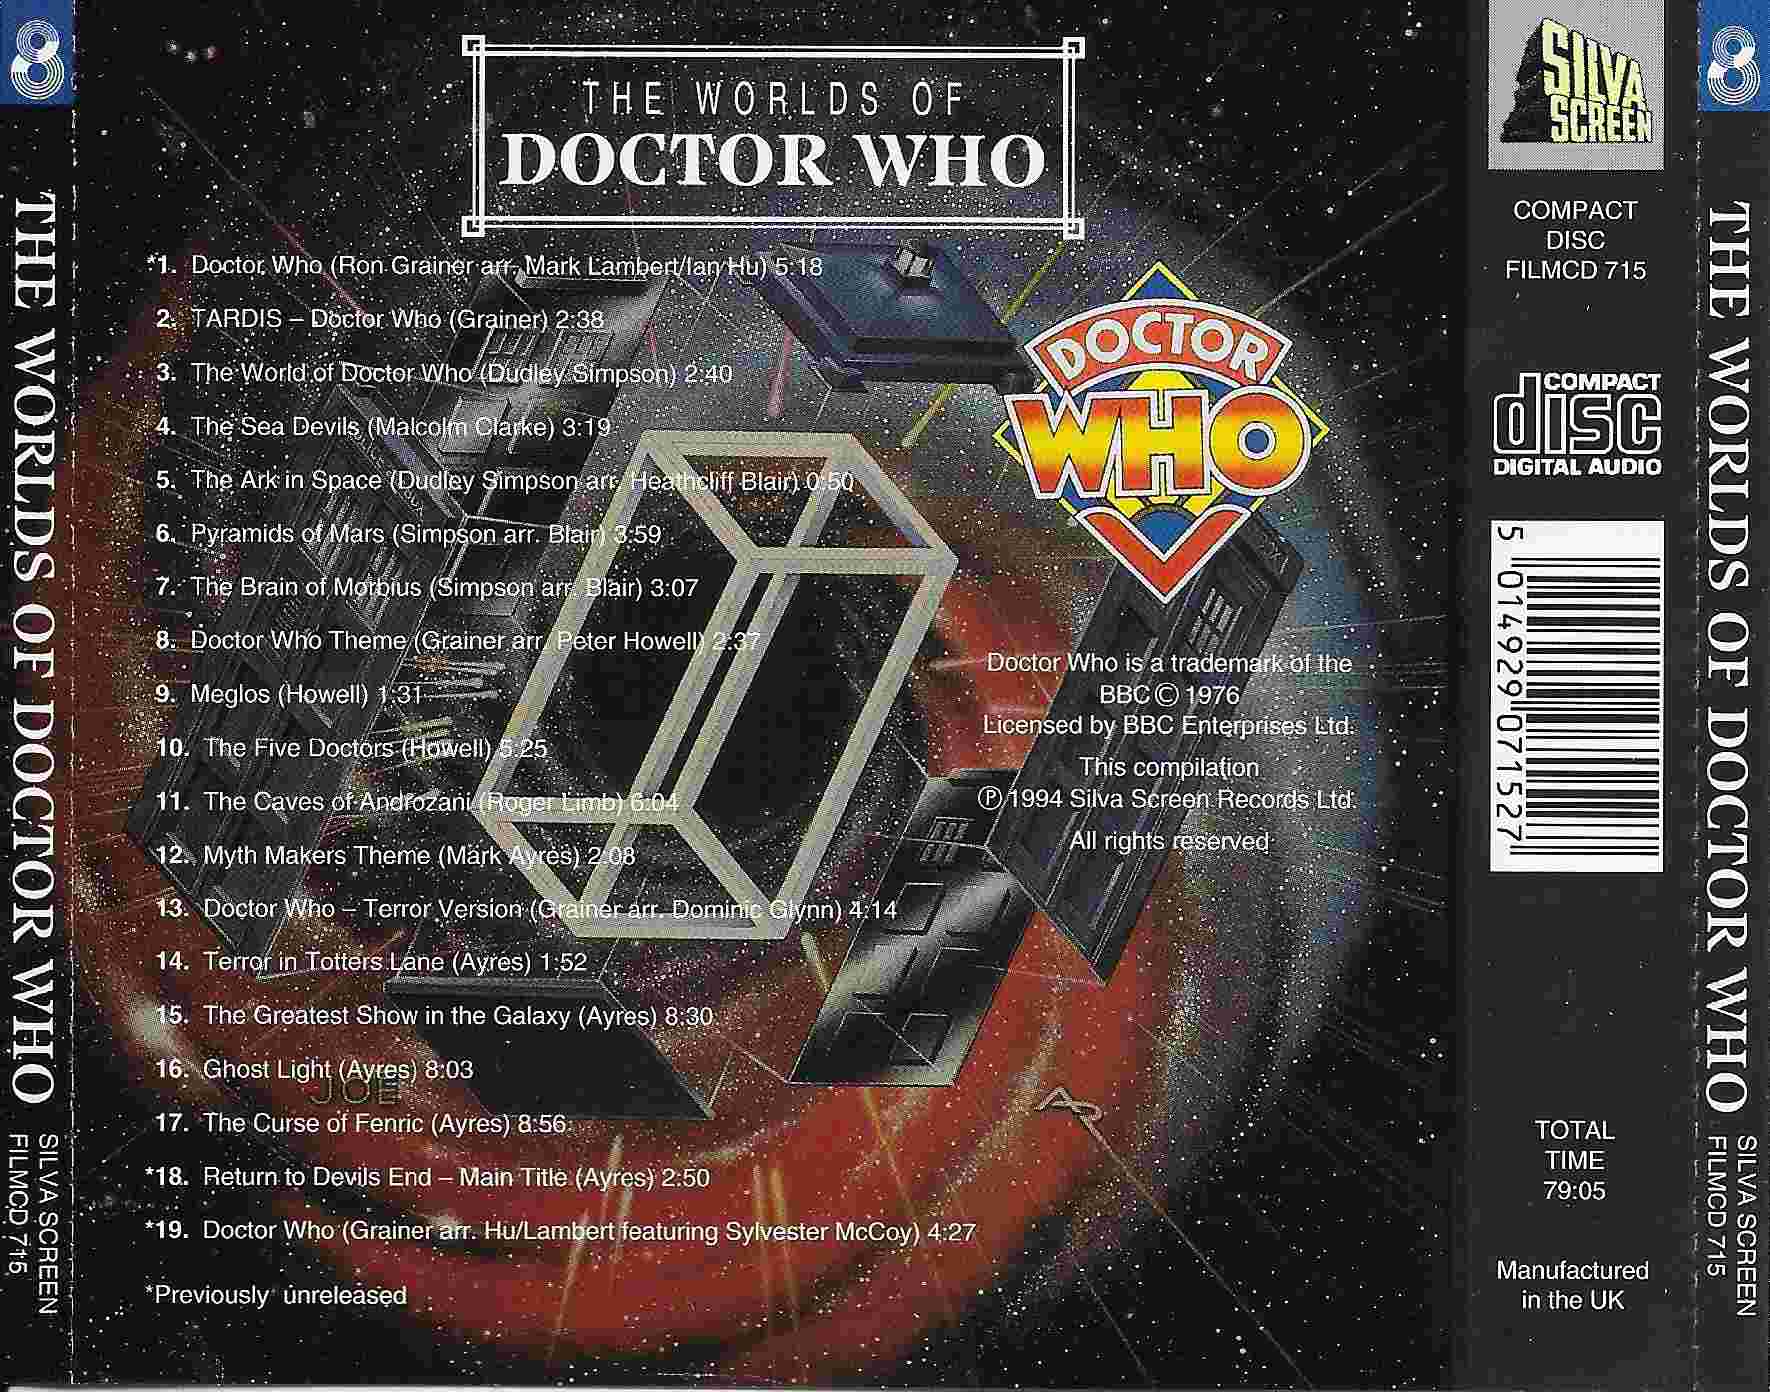 Picture of FILMCD 715 The Worlds of doctor who by artist Various from the BBC records and Tapes library